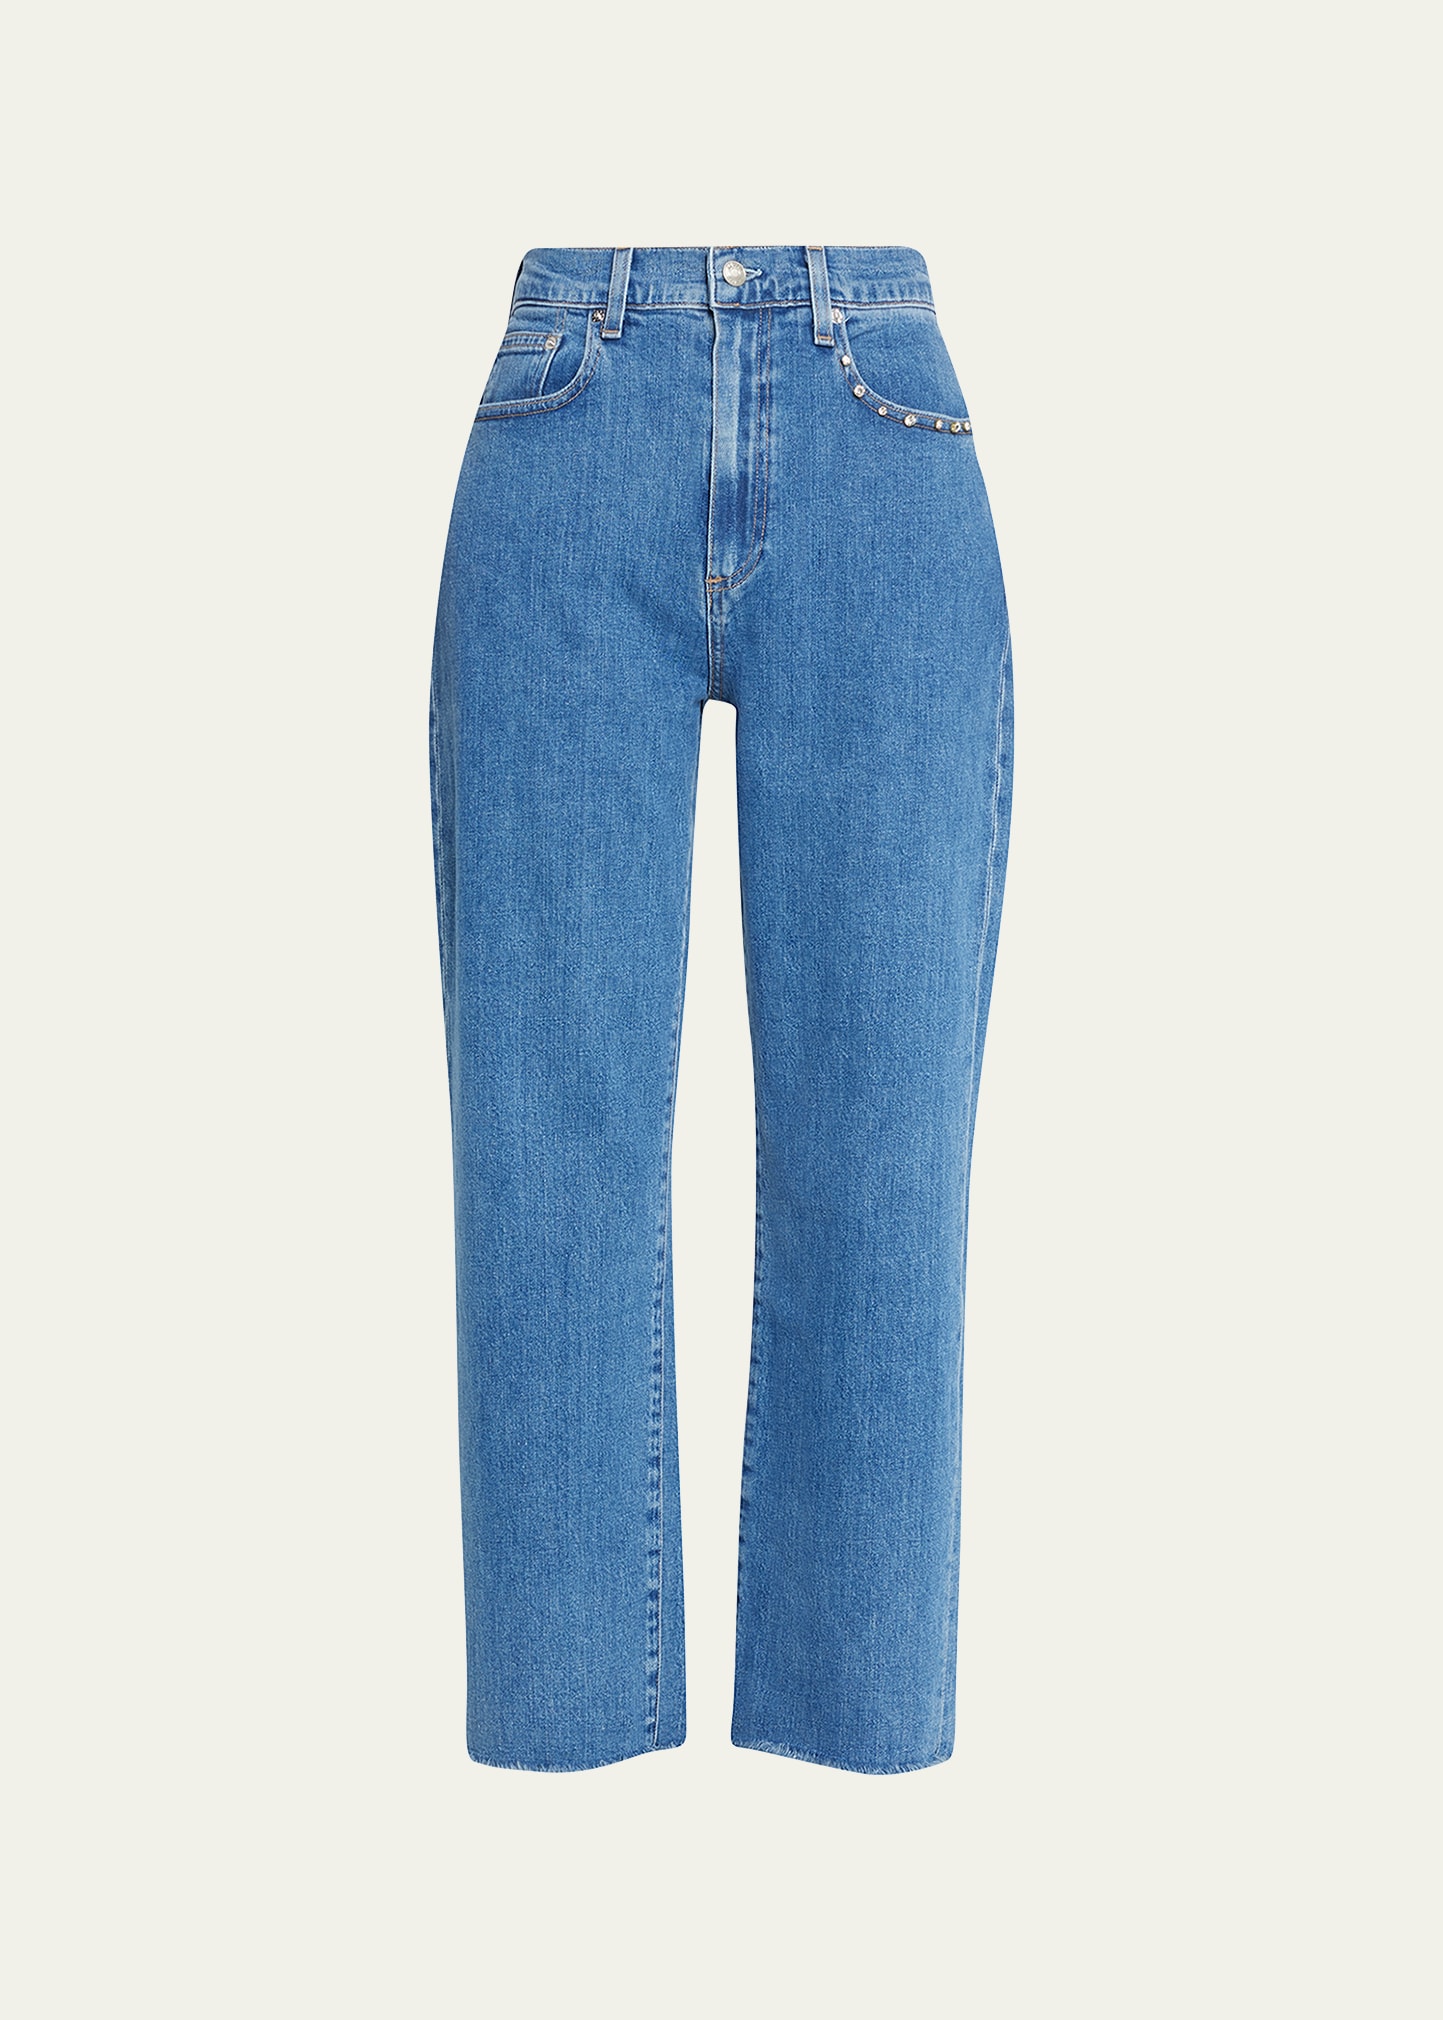 LE JEAN Mia Relaxed Straight Ankle Jeans